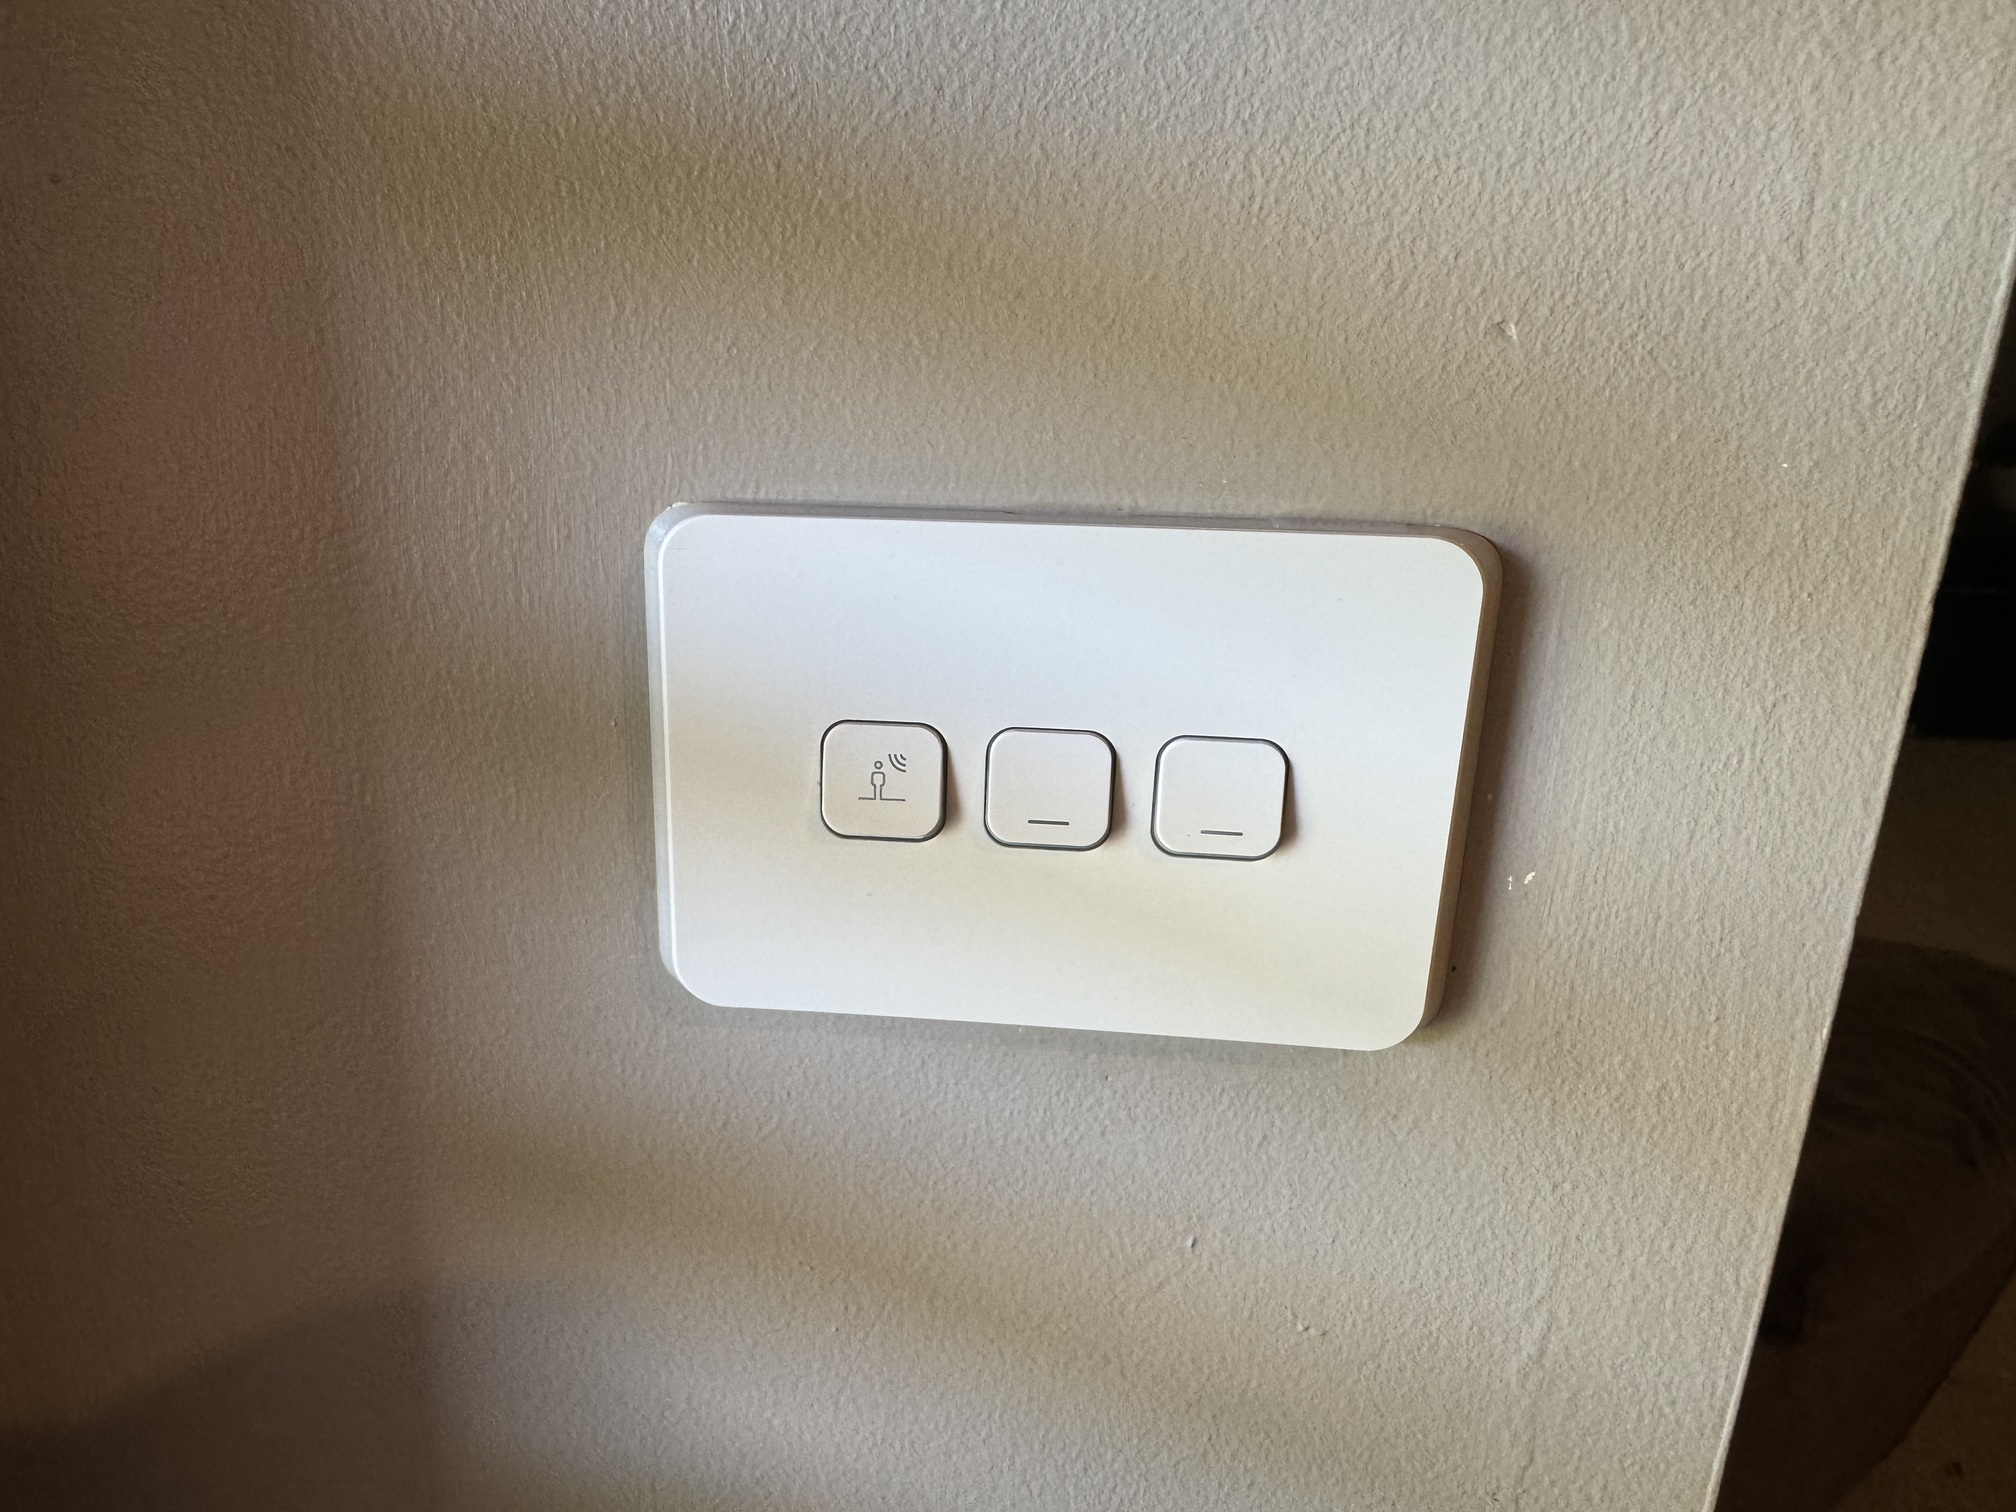 Magic Home Pro switches - Hardware - Home Assistant Community